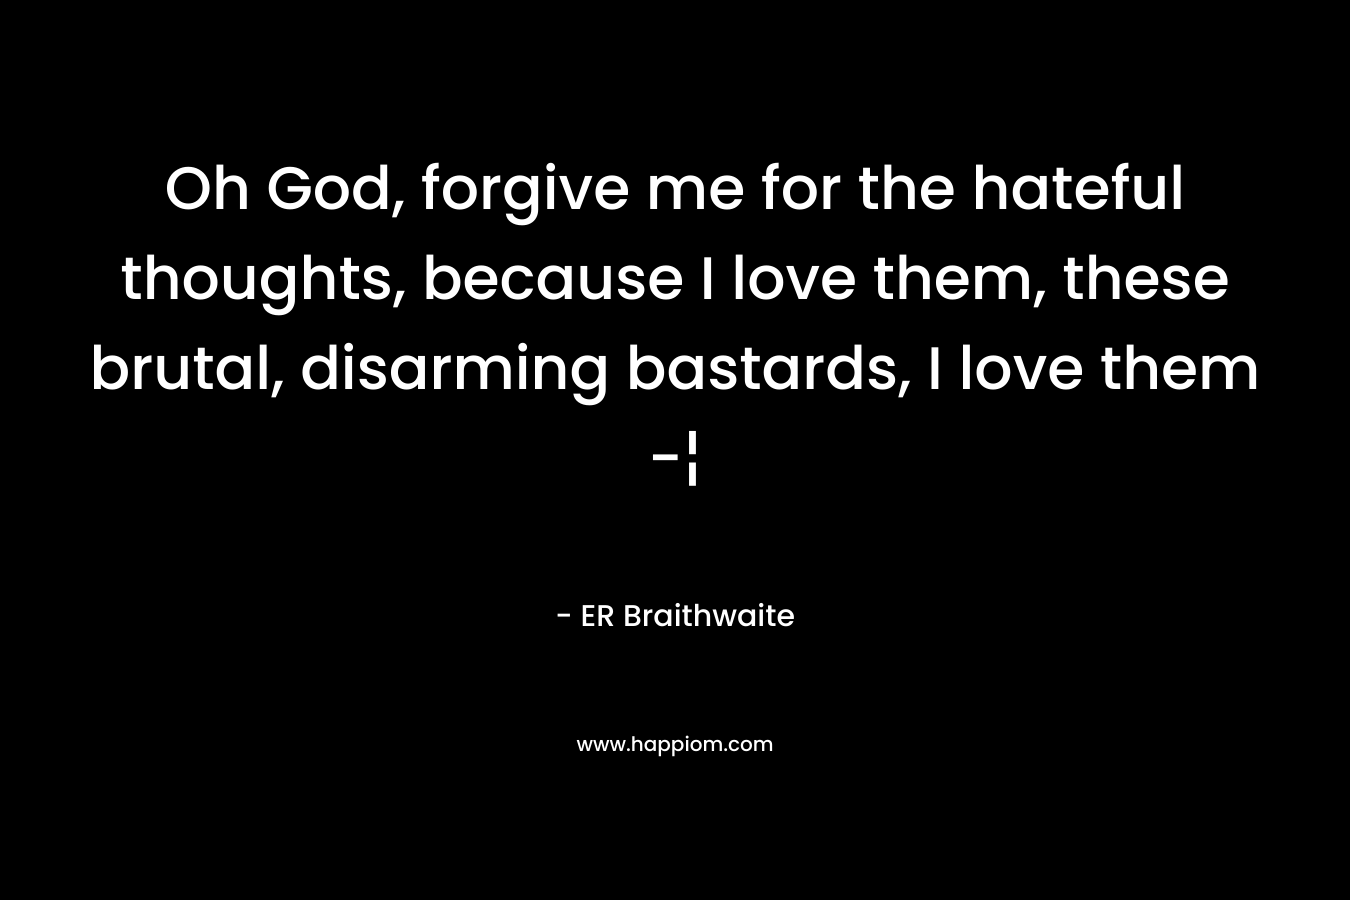 Oh God, forgive me for the hateful thoughts, because I love them, these brutal, disarming bastards, I love them -¦